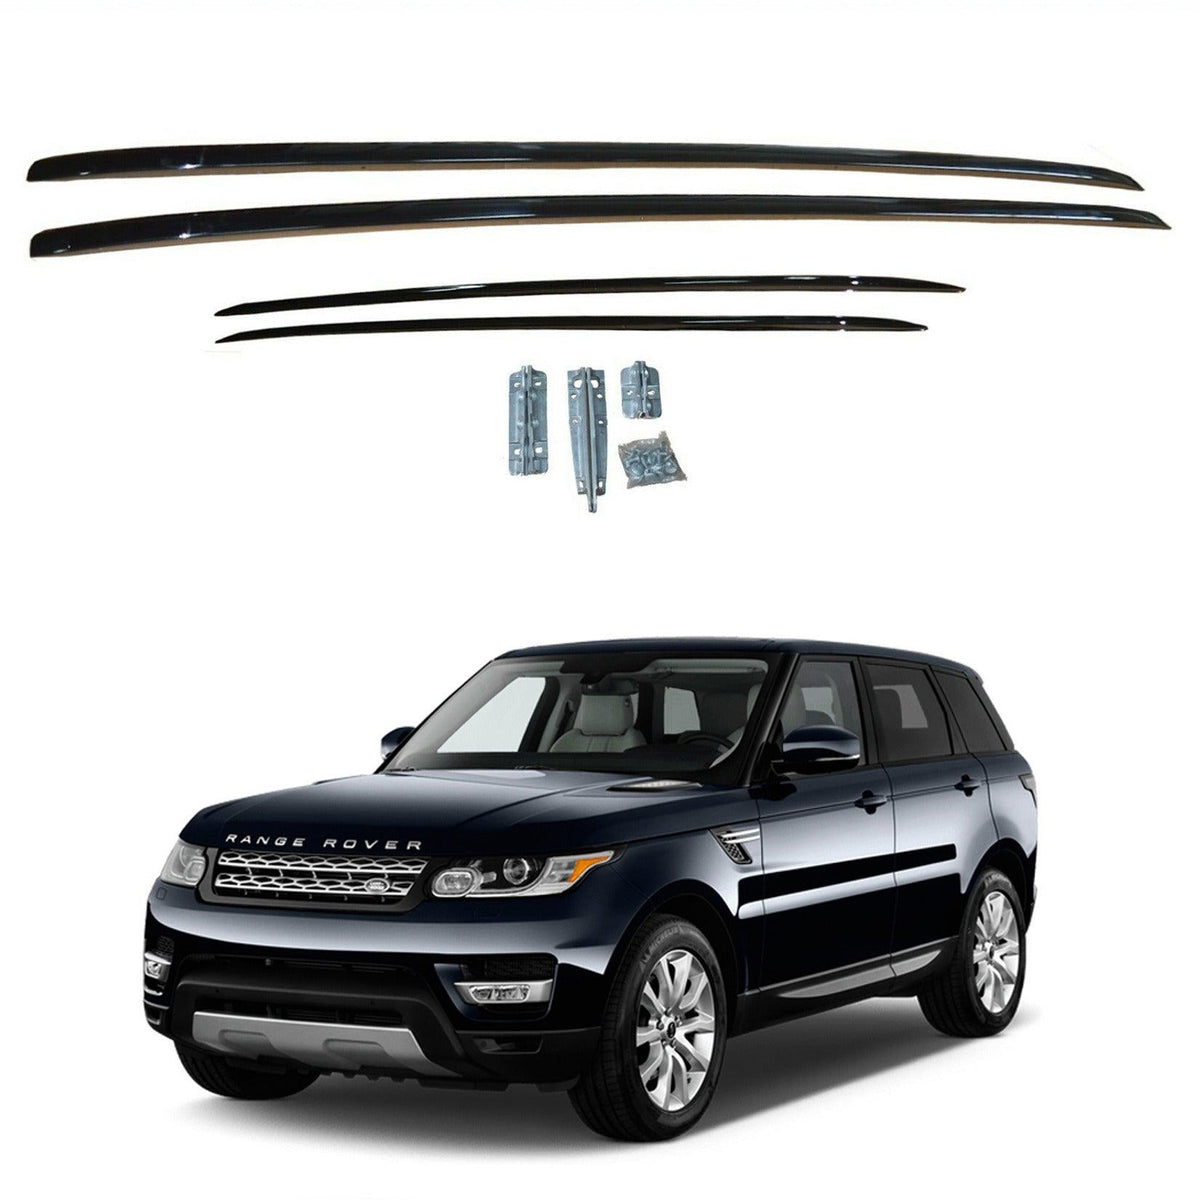 RANGE ROVER SPORT 2014 ON - OE STYLE ROOF BARS RAILS - BLACK - PAIR - Storm Xccessories2